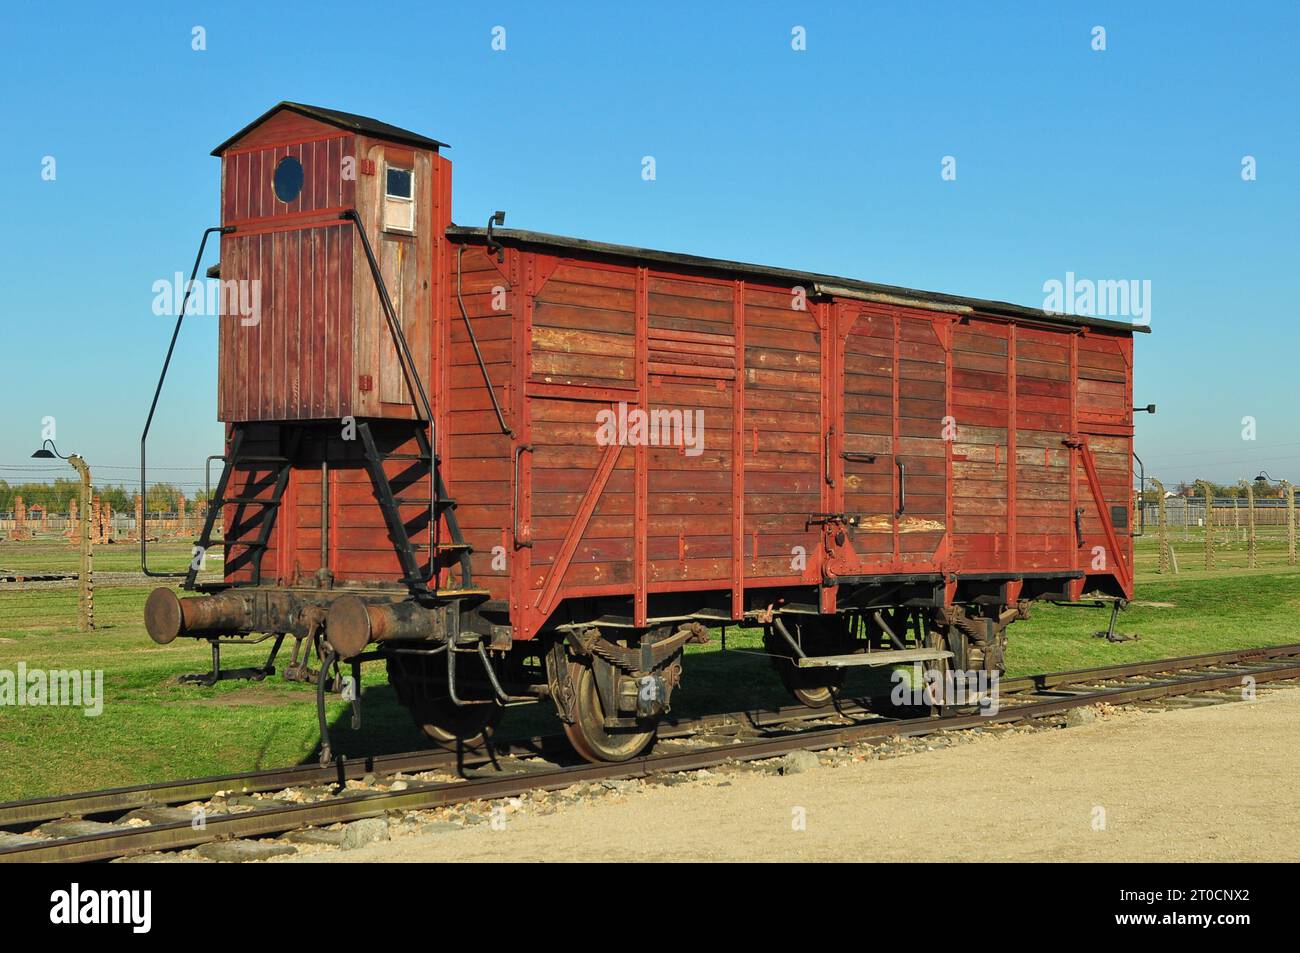 An original red wagon from the infamous 'Holocaust trains' at the Auschwitz Birkenau Concentration Camp. Poland, October 2012 Stock Photo